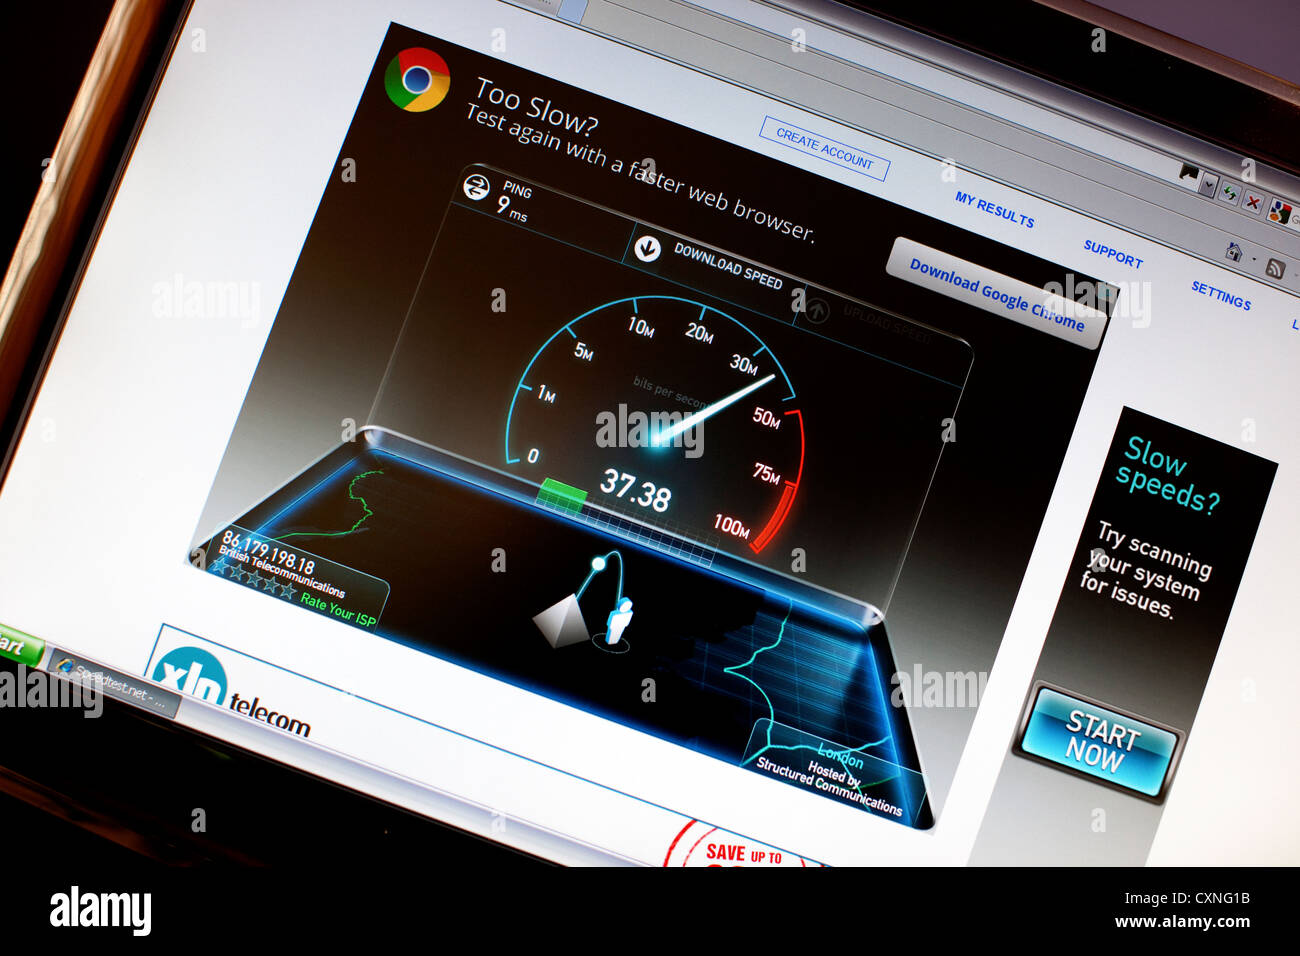 Download speed of 37Mbps using BT Infinity Fibre Optic broadband service,  London Stock Photo - Alamy